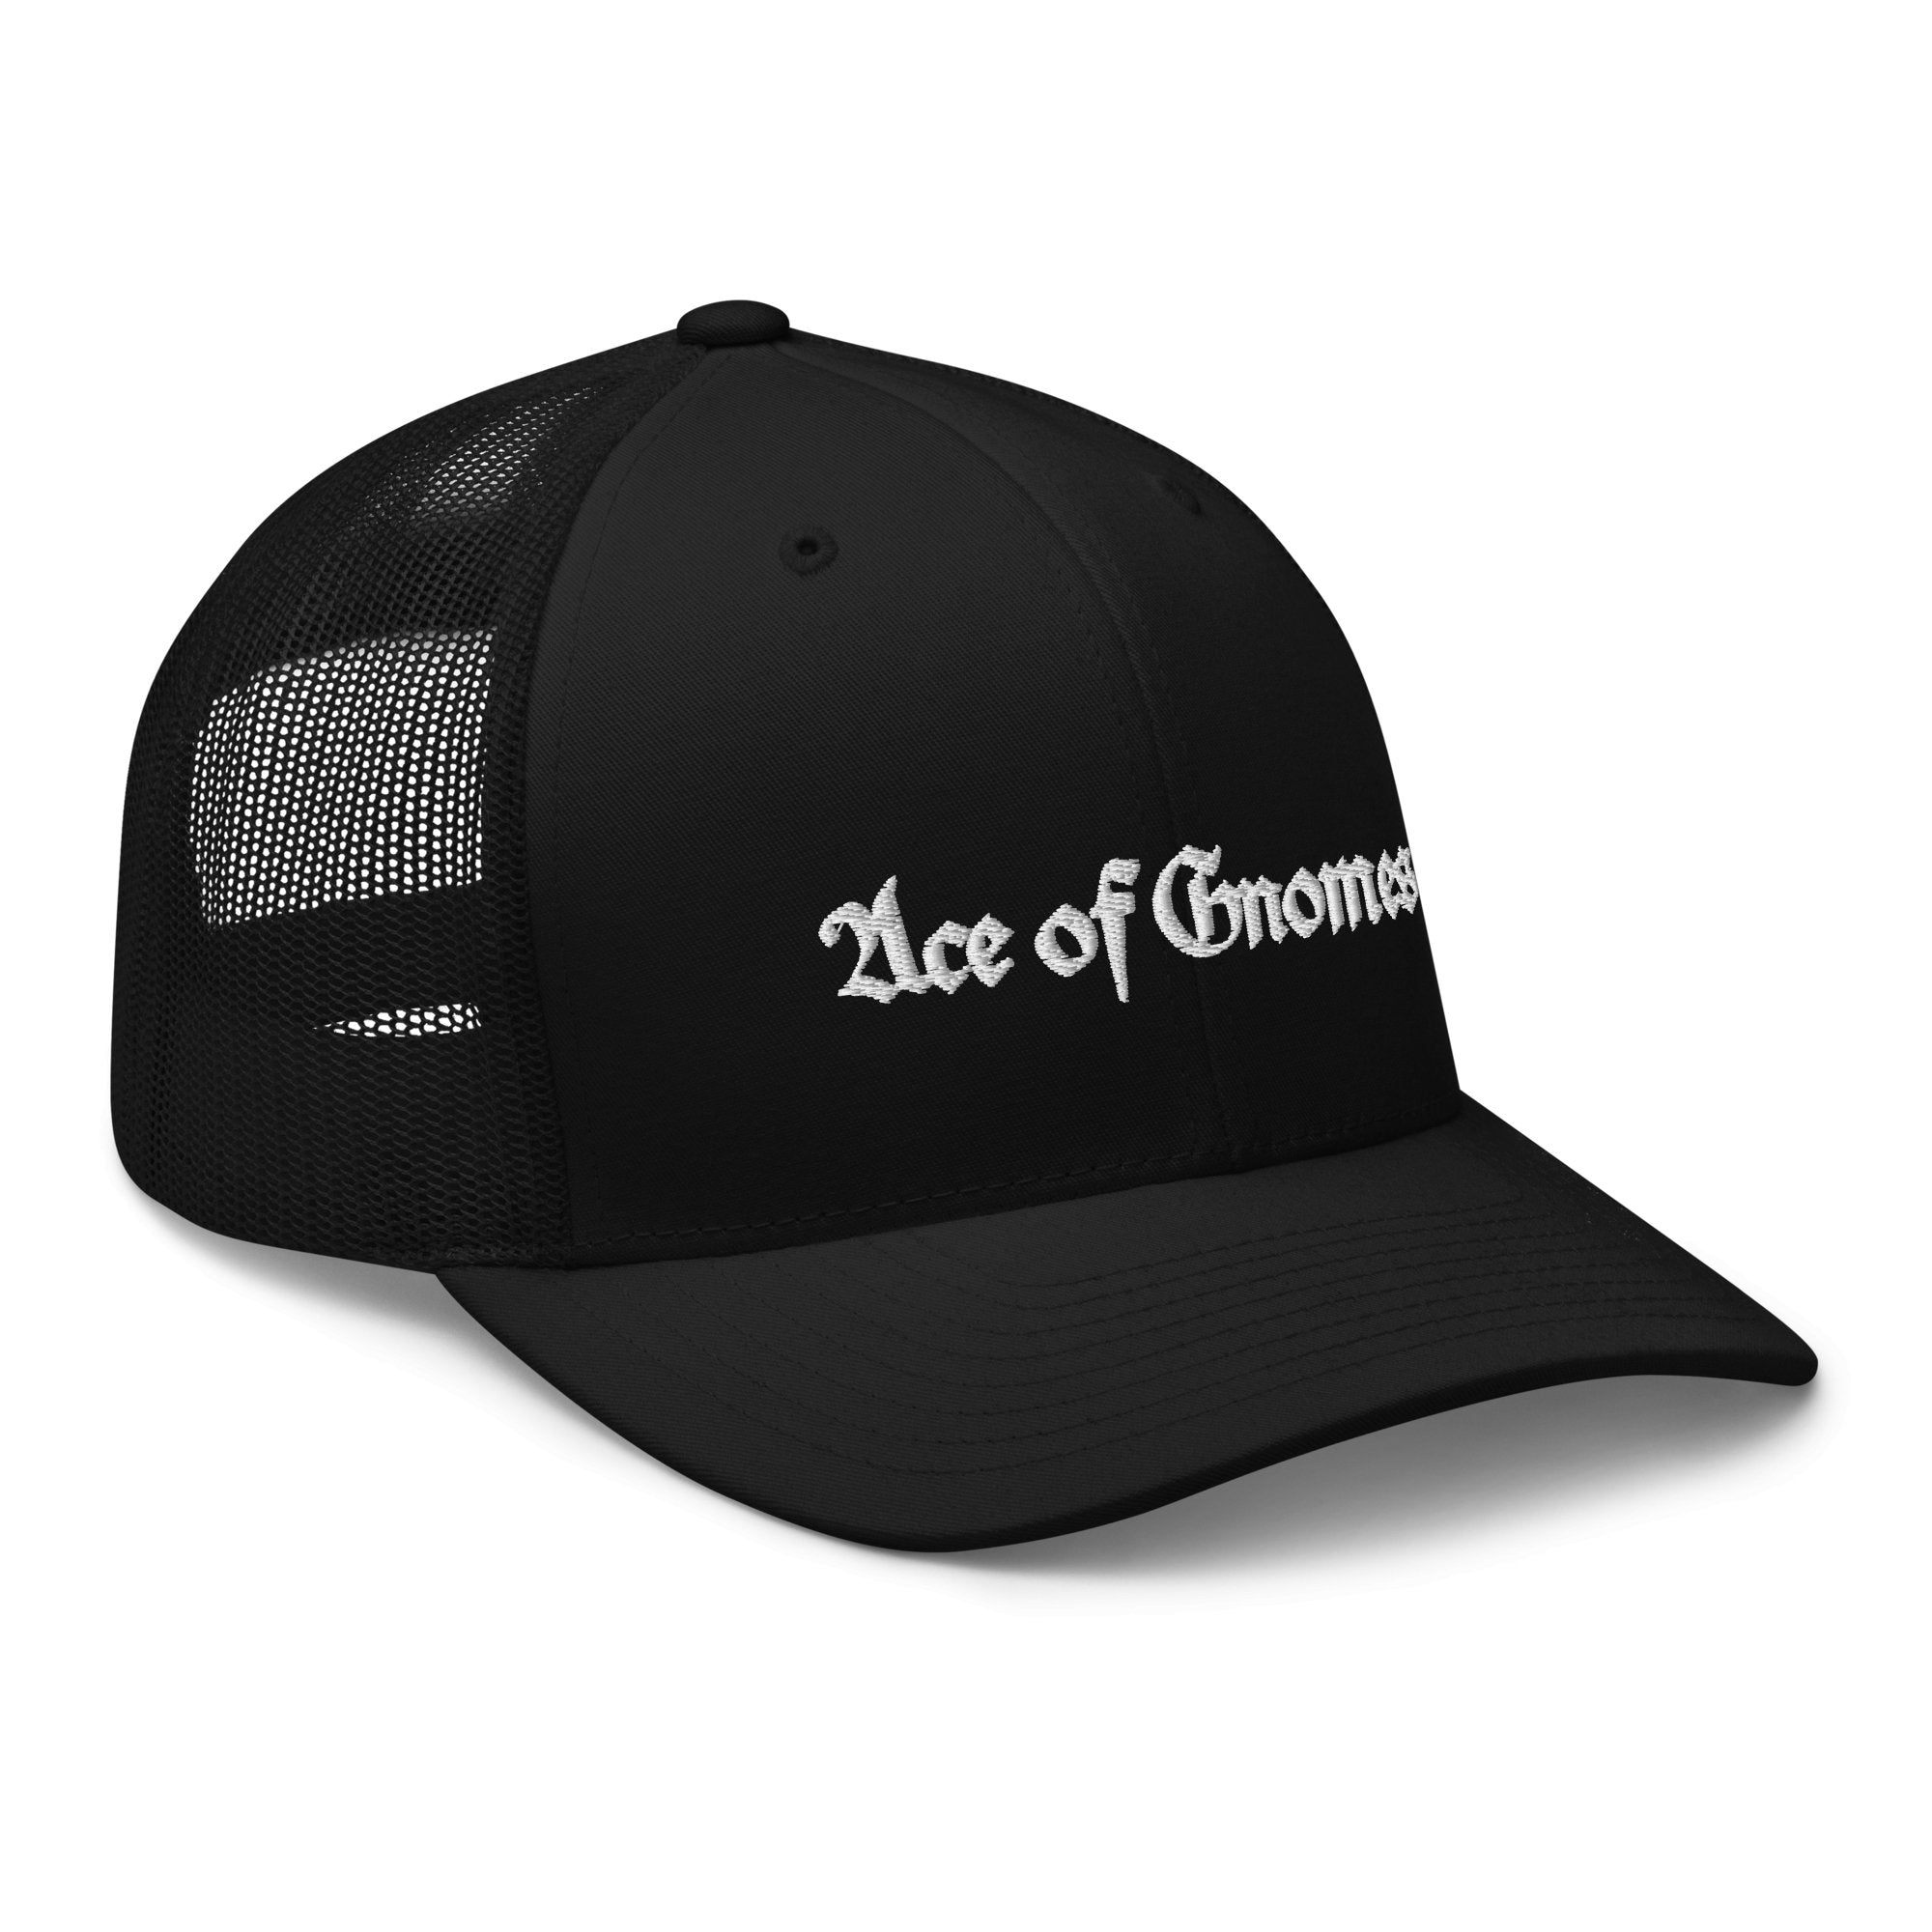 Ace of Gnomes | Trucker Hat - Ace of Gnomes - 8169080_8747